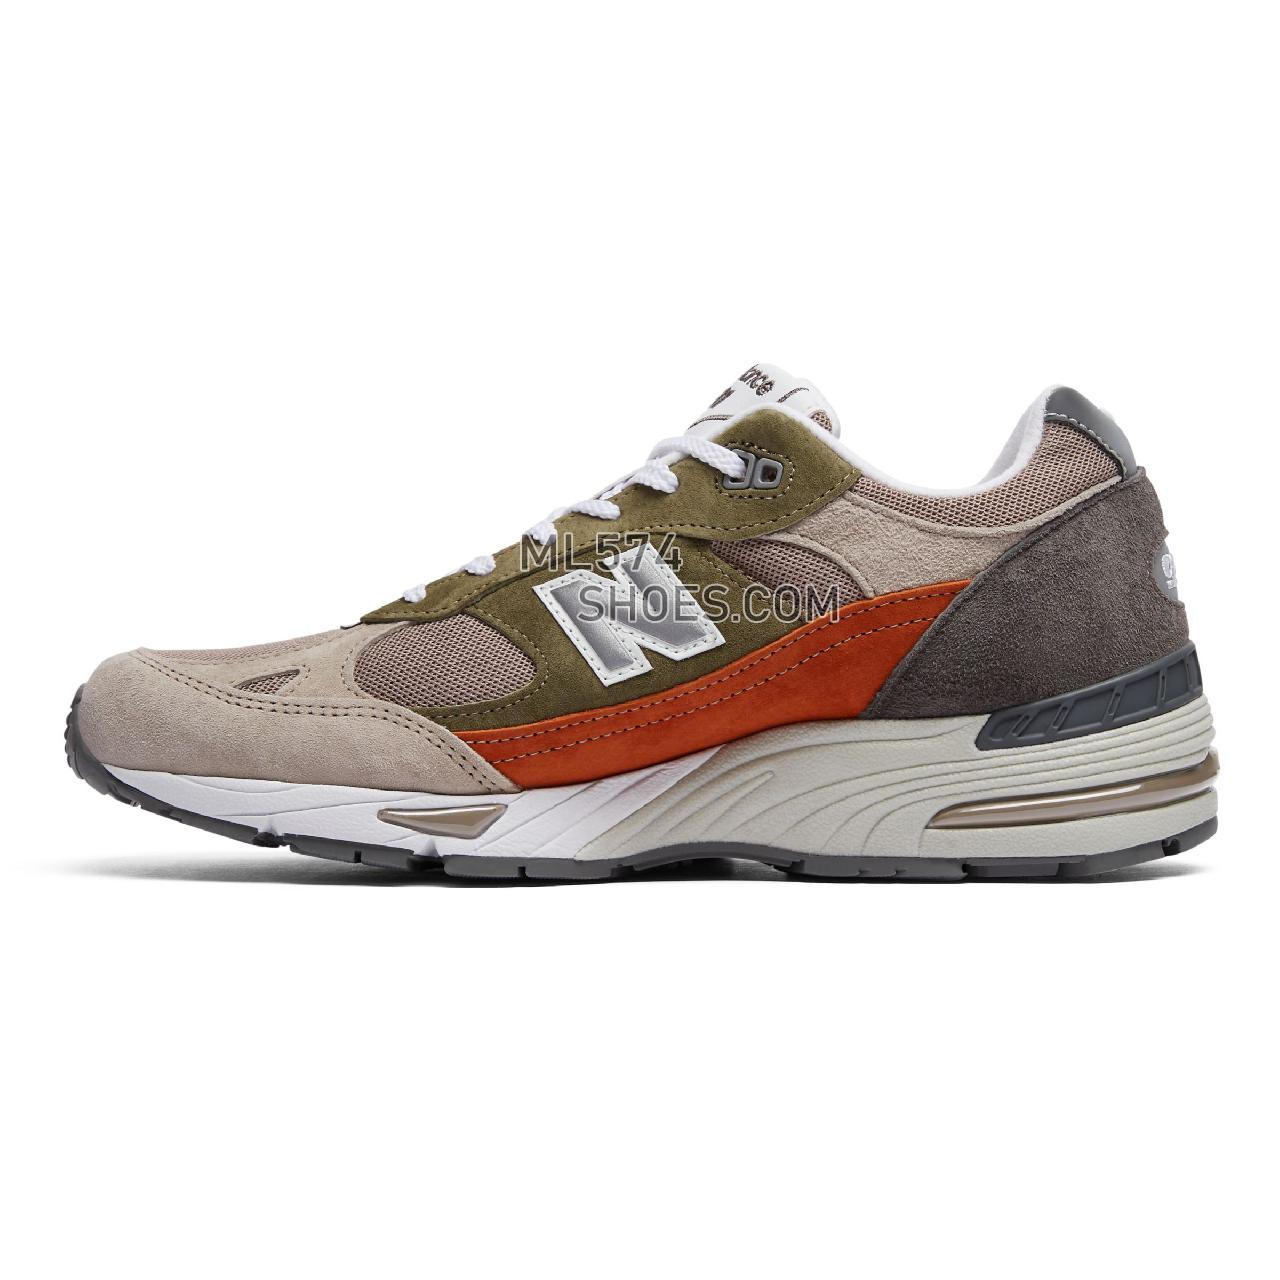 New Balance Made in UK 991 - Men's Made in UK 991 Classic - Nude with Green and Grey - M991NGO